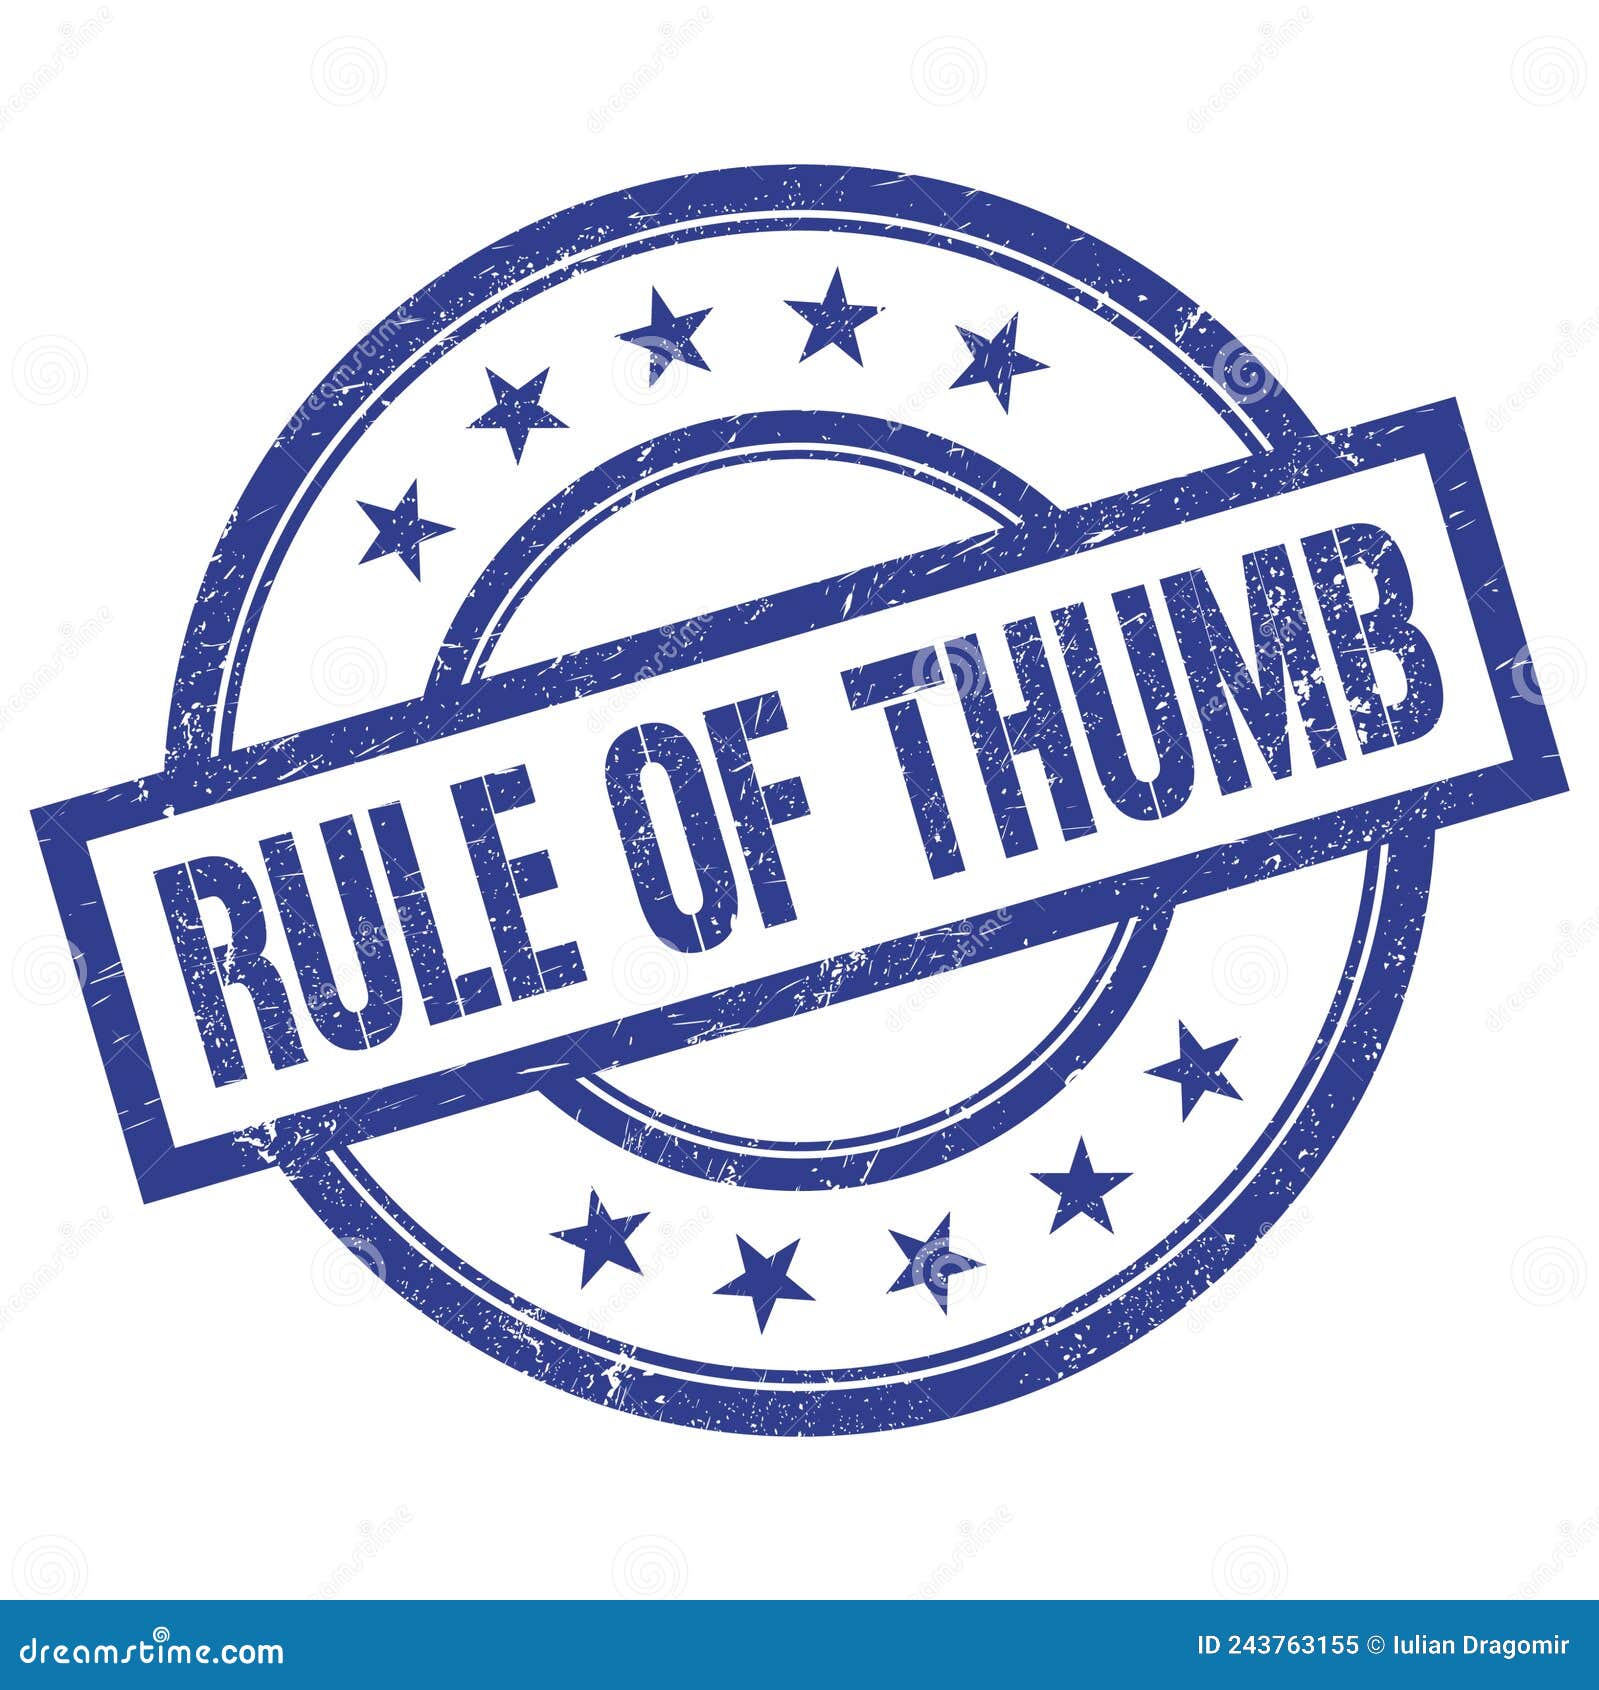 rule of thumb text written on blue vintage round stamp